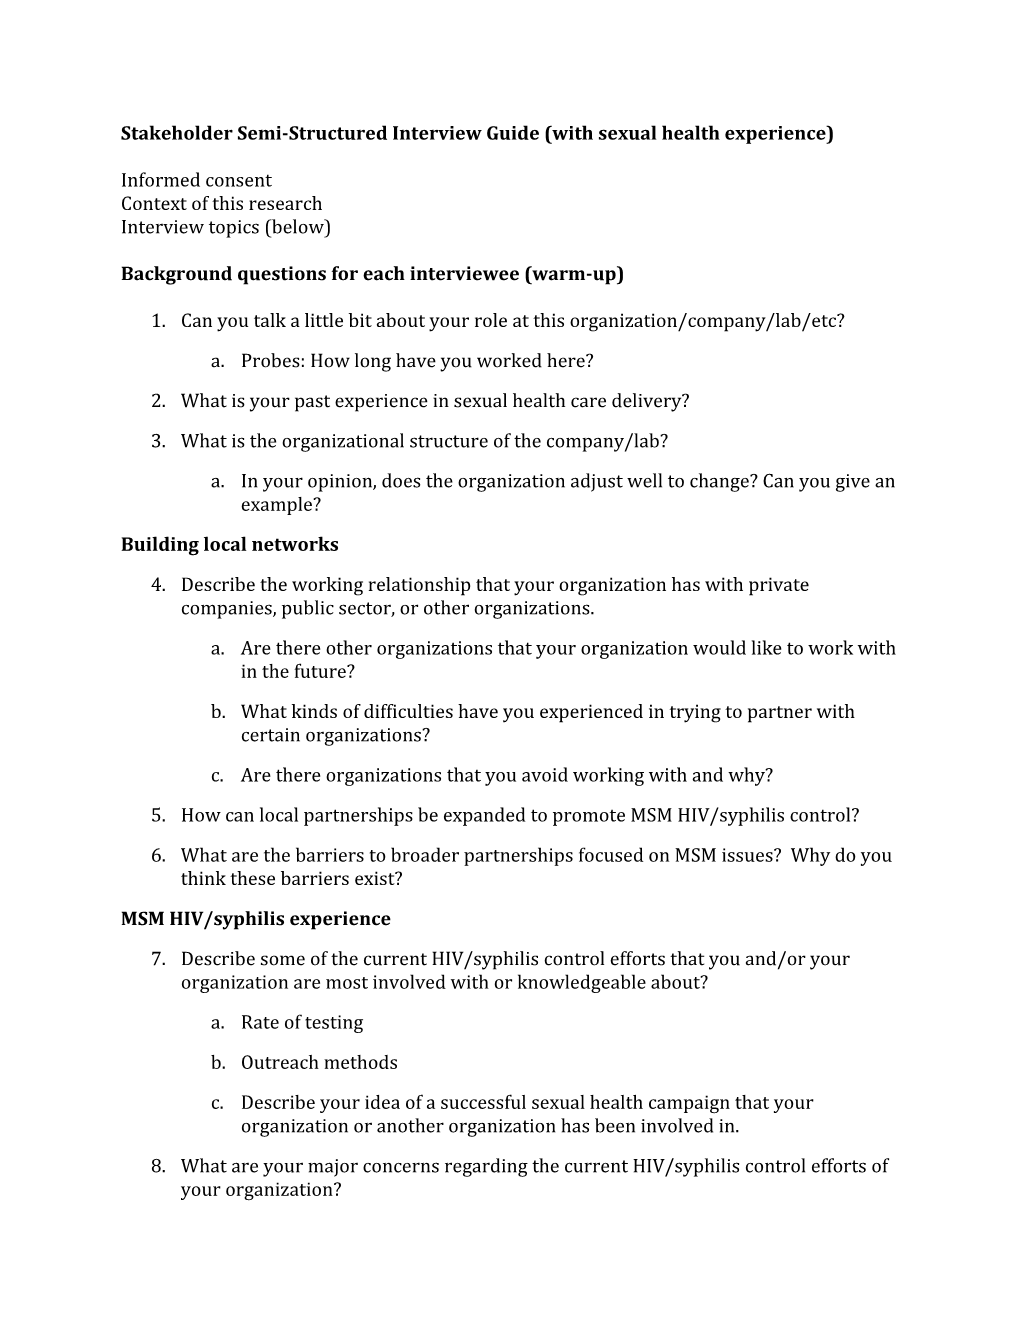 Stakeholder Semi-Structured Interview Guide (With Sexual Health Experience)